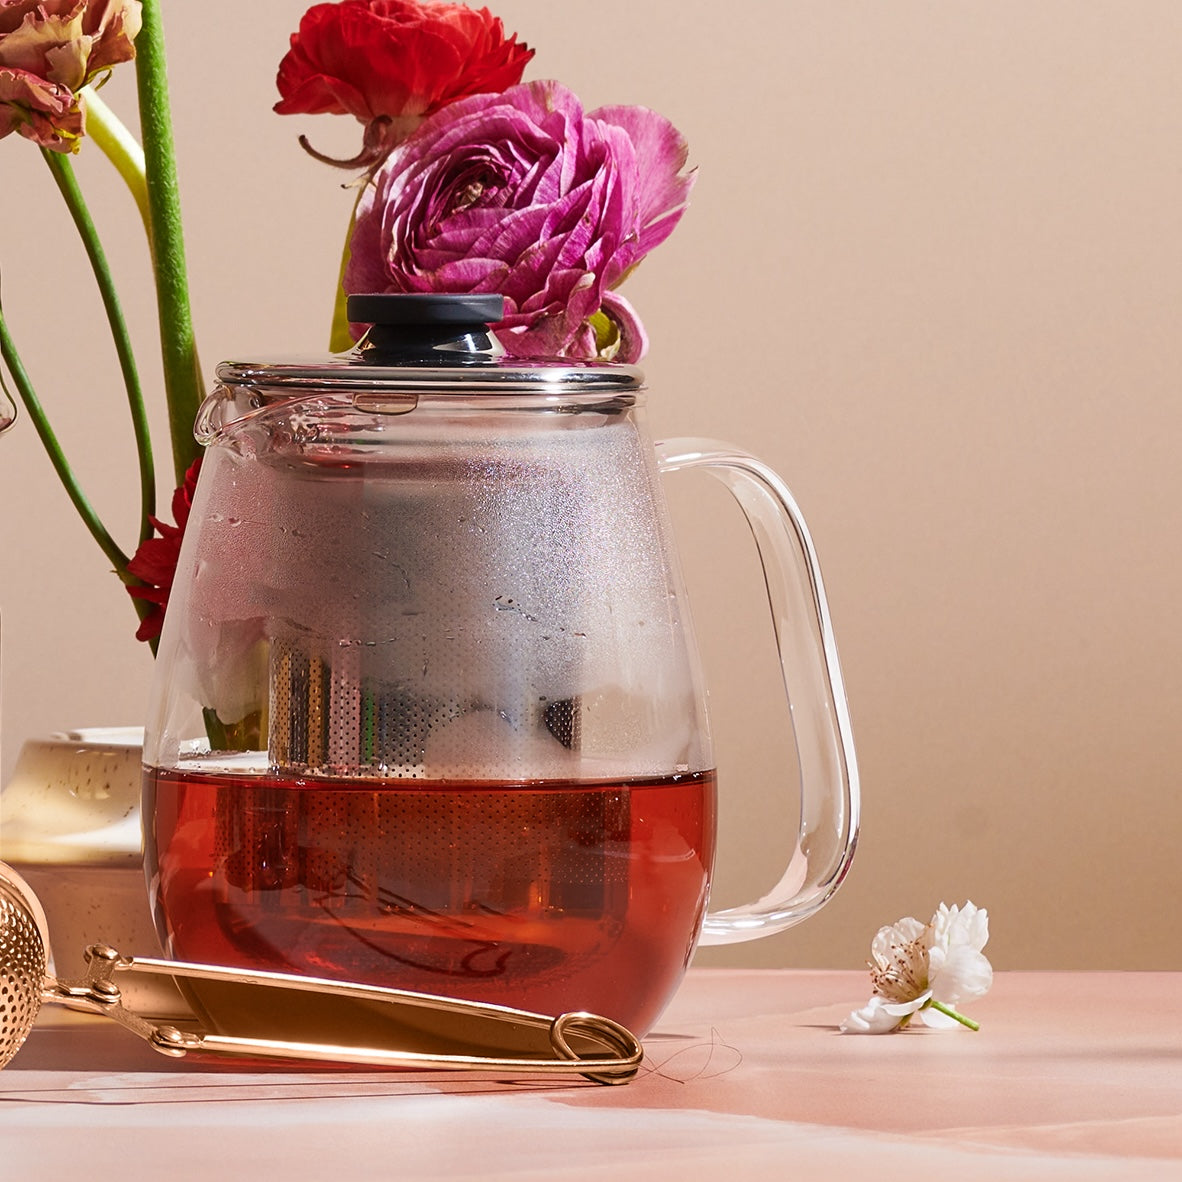 A Magic Hour Kinto Stainless Steel Teapot filled with organic tea sits on a table. The teapot has a stainless steel infuser inside and a clear lid with a black knob. Beside it is a pair of gold-colored tongs and a small white flower. In the background, there are vibrant pink and red flowers.